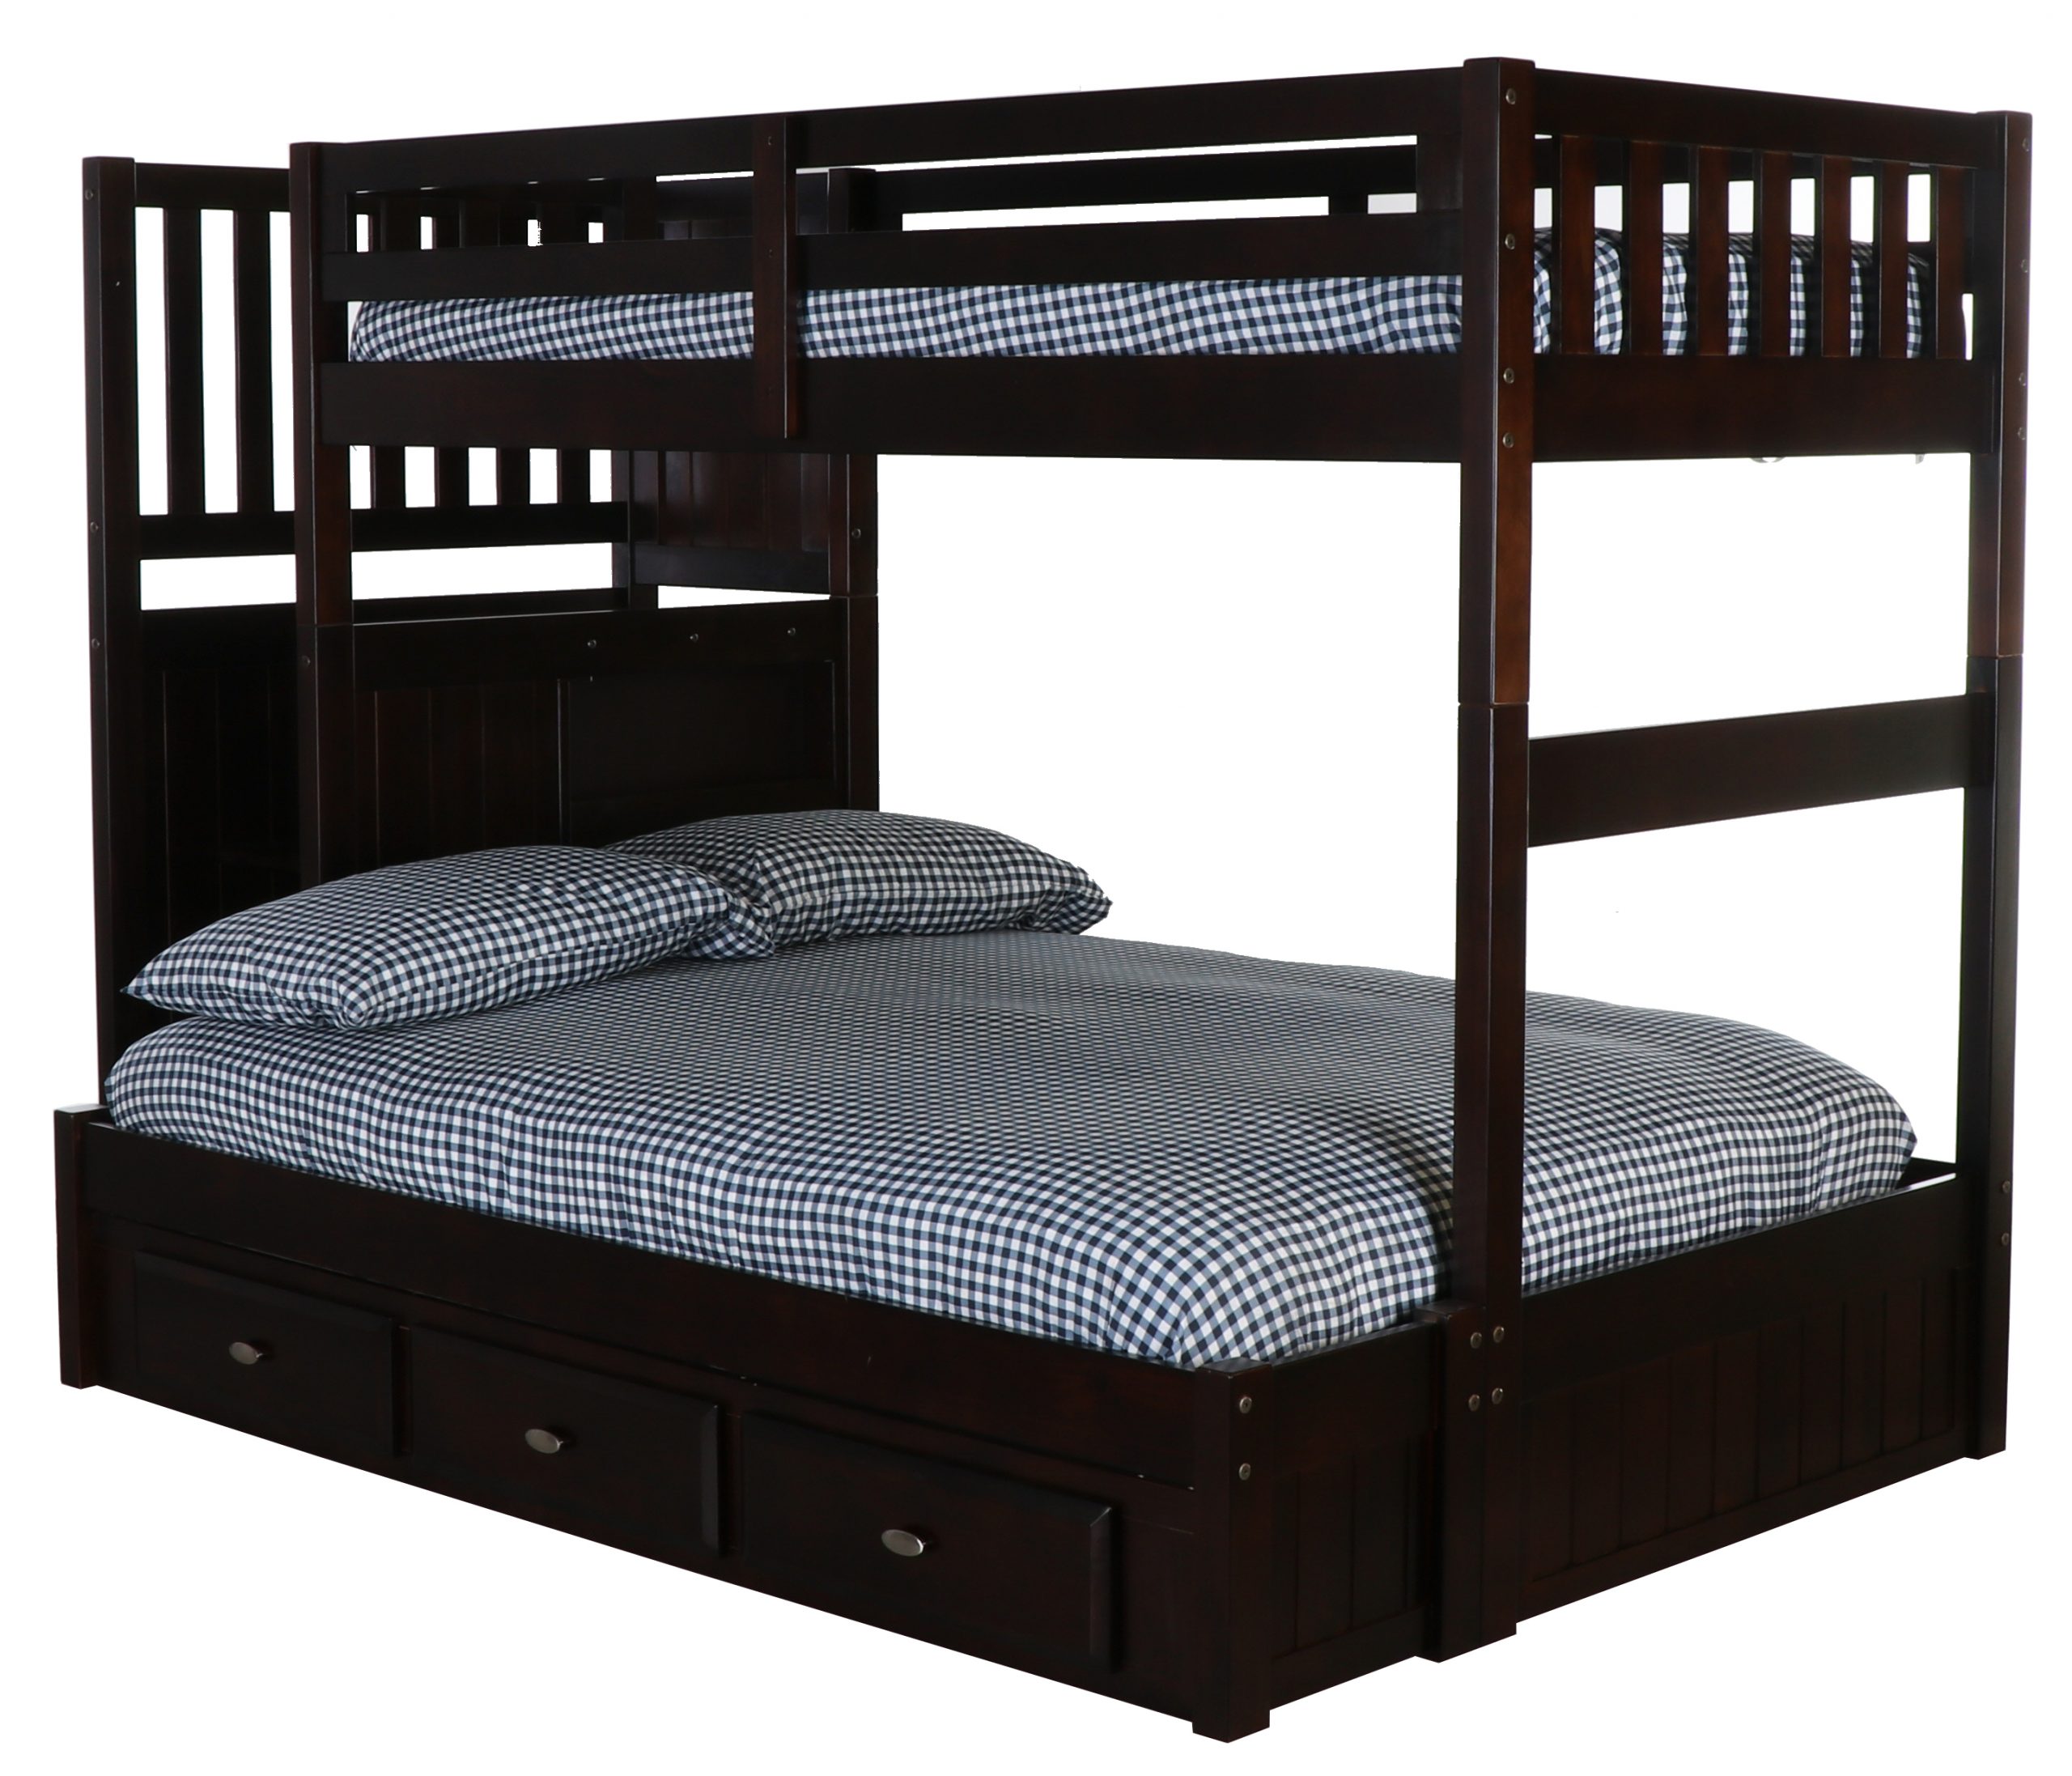 Full Espresso Staircase Bunk Beds, Discovery World Furniture Honey Twin Over Full Staircase Bunk Bed